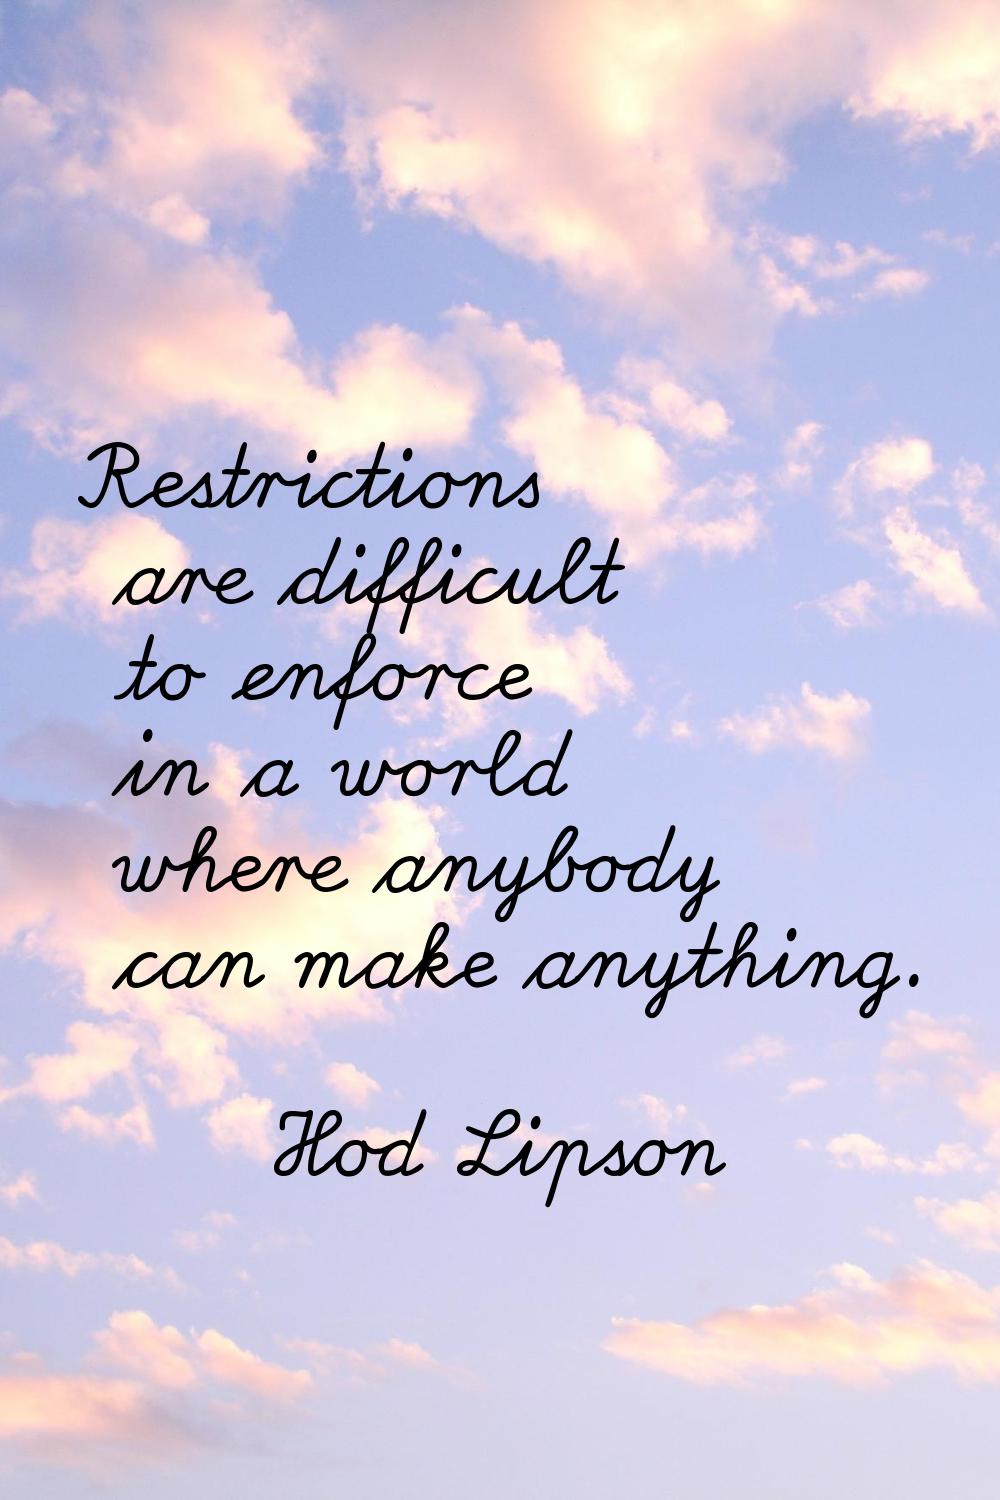 Restrictions are difficult to enforce in a world where anybody can make anything.